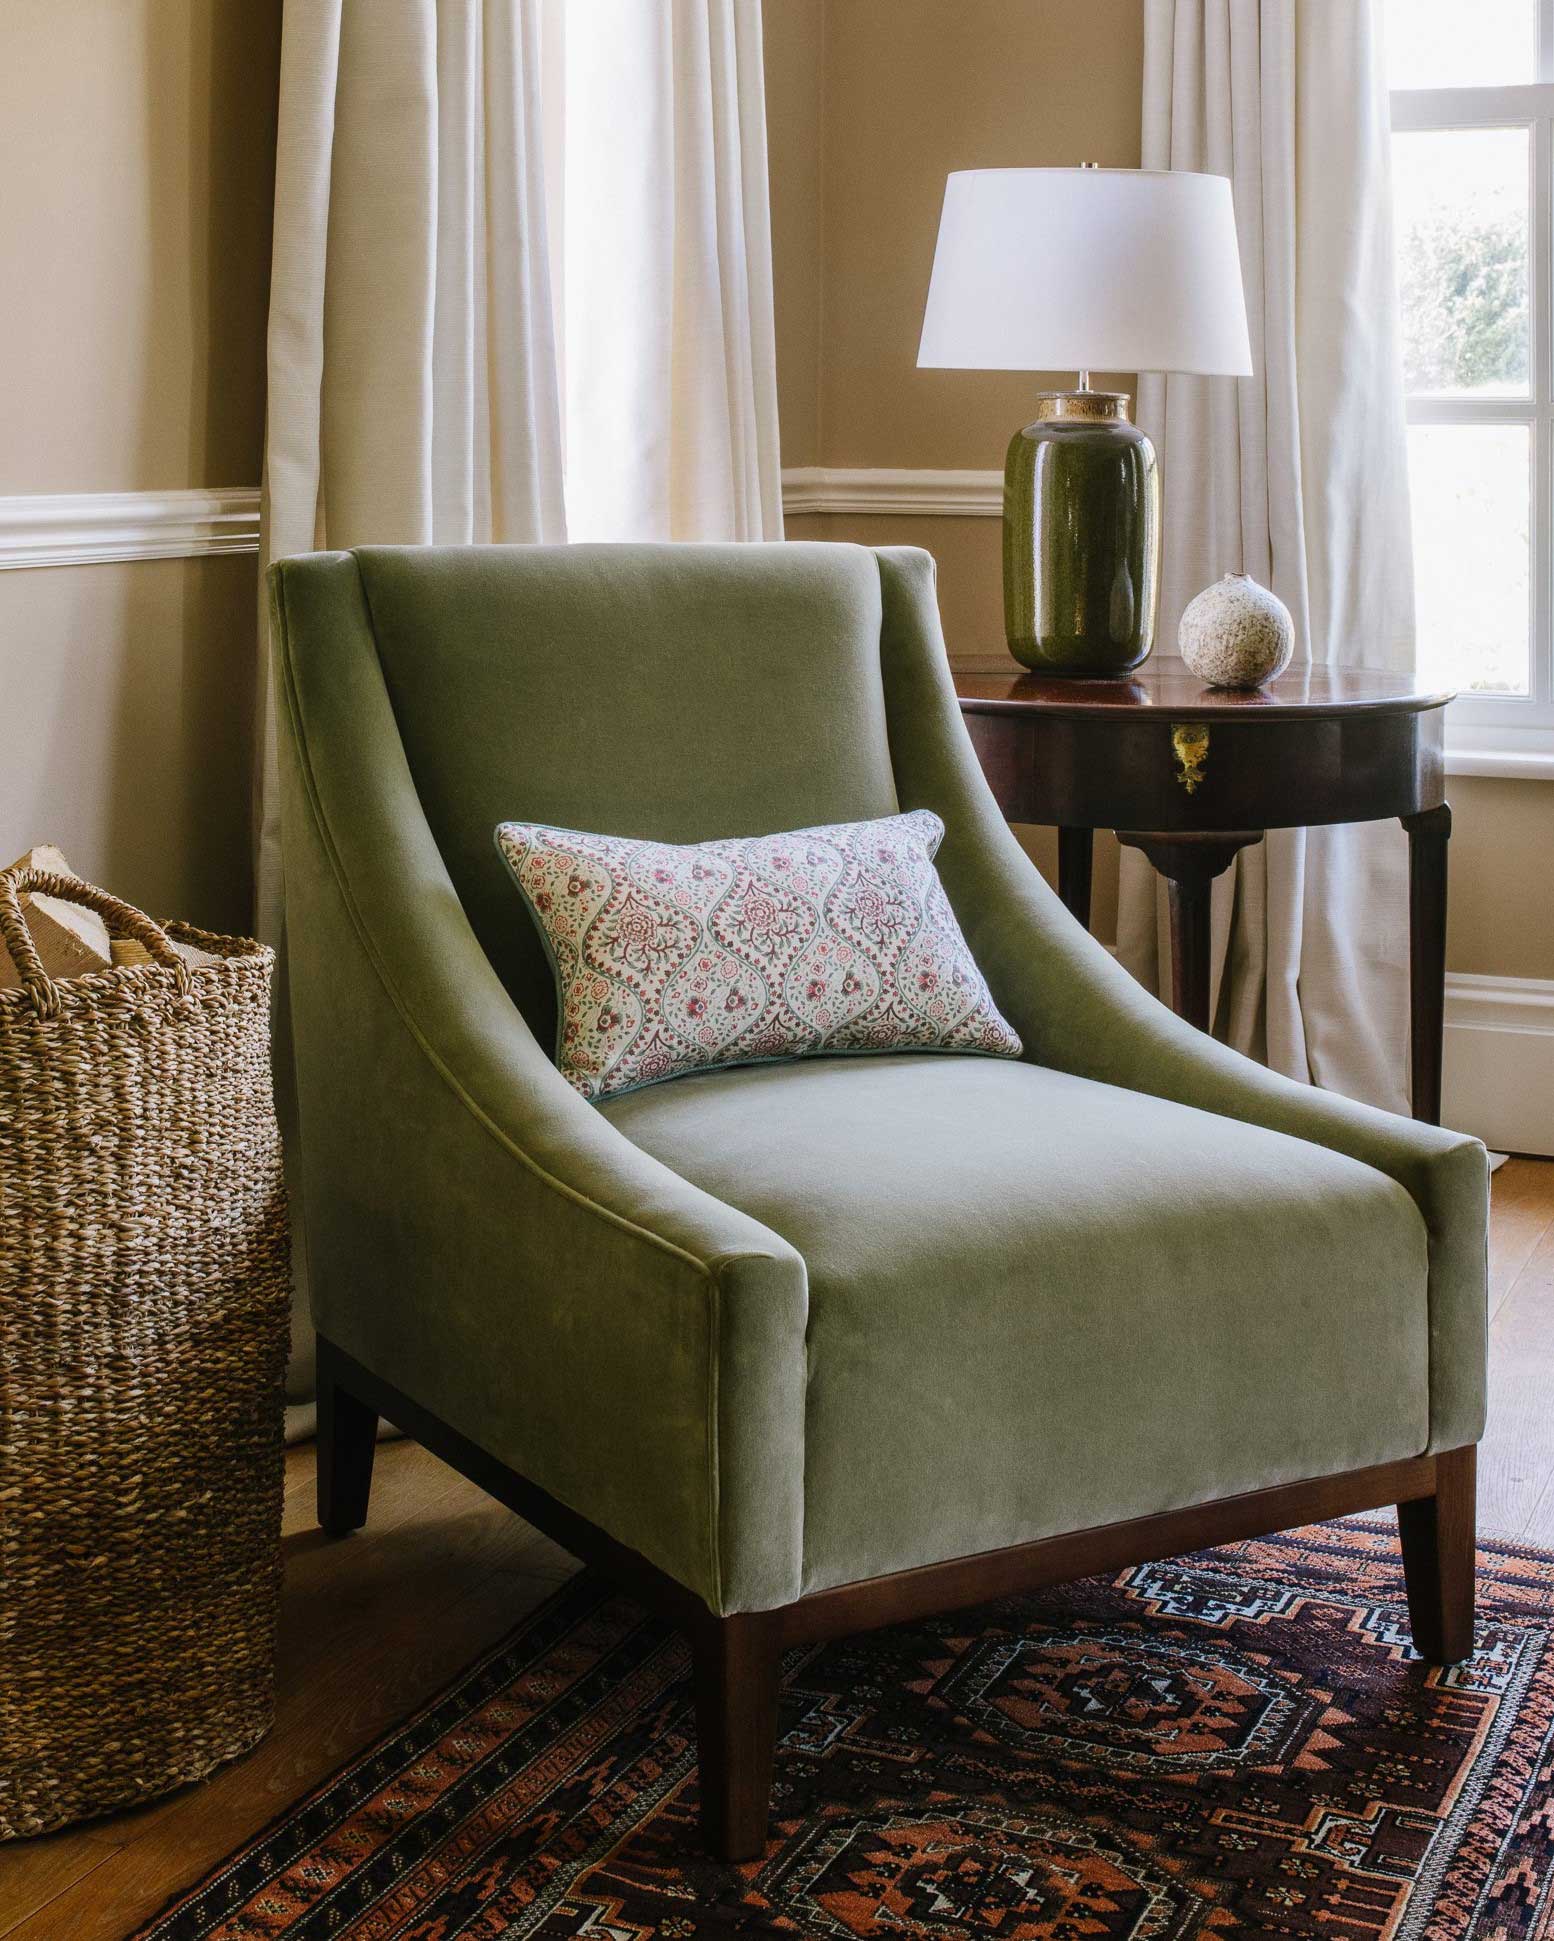 The Chesthill Armchair